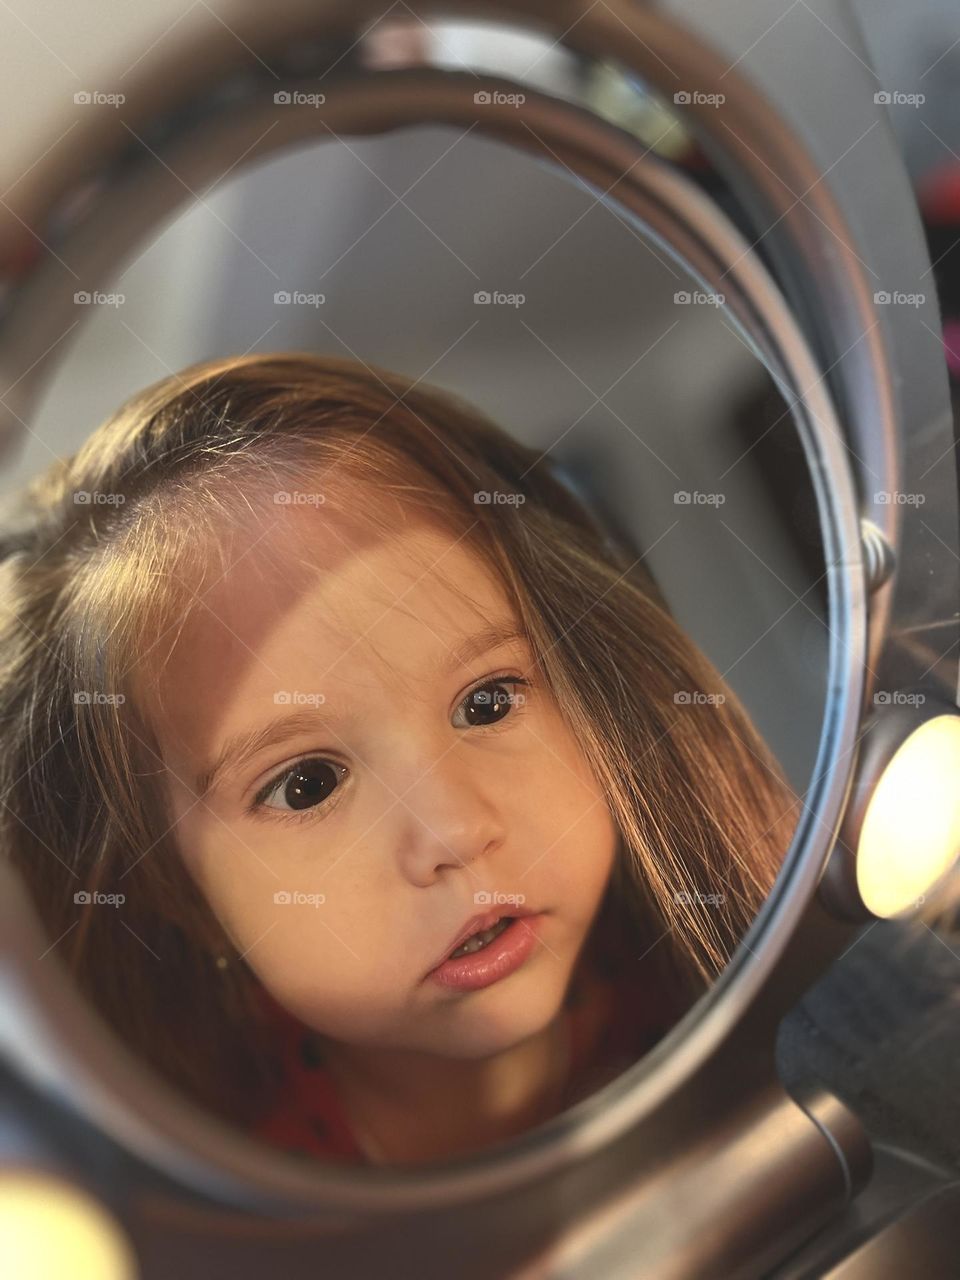 Little girl staring at herself in the mirror 